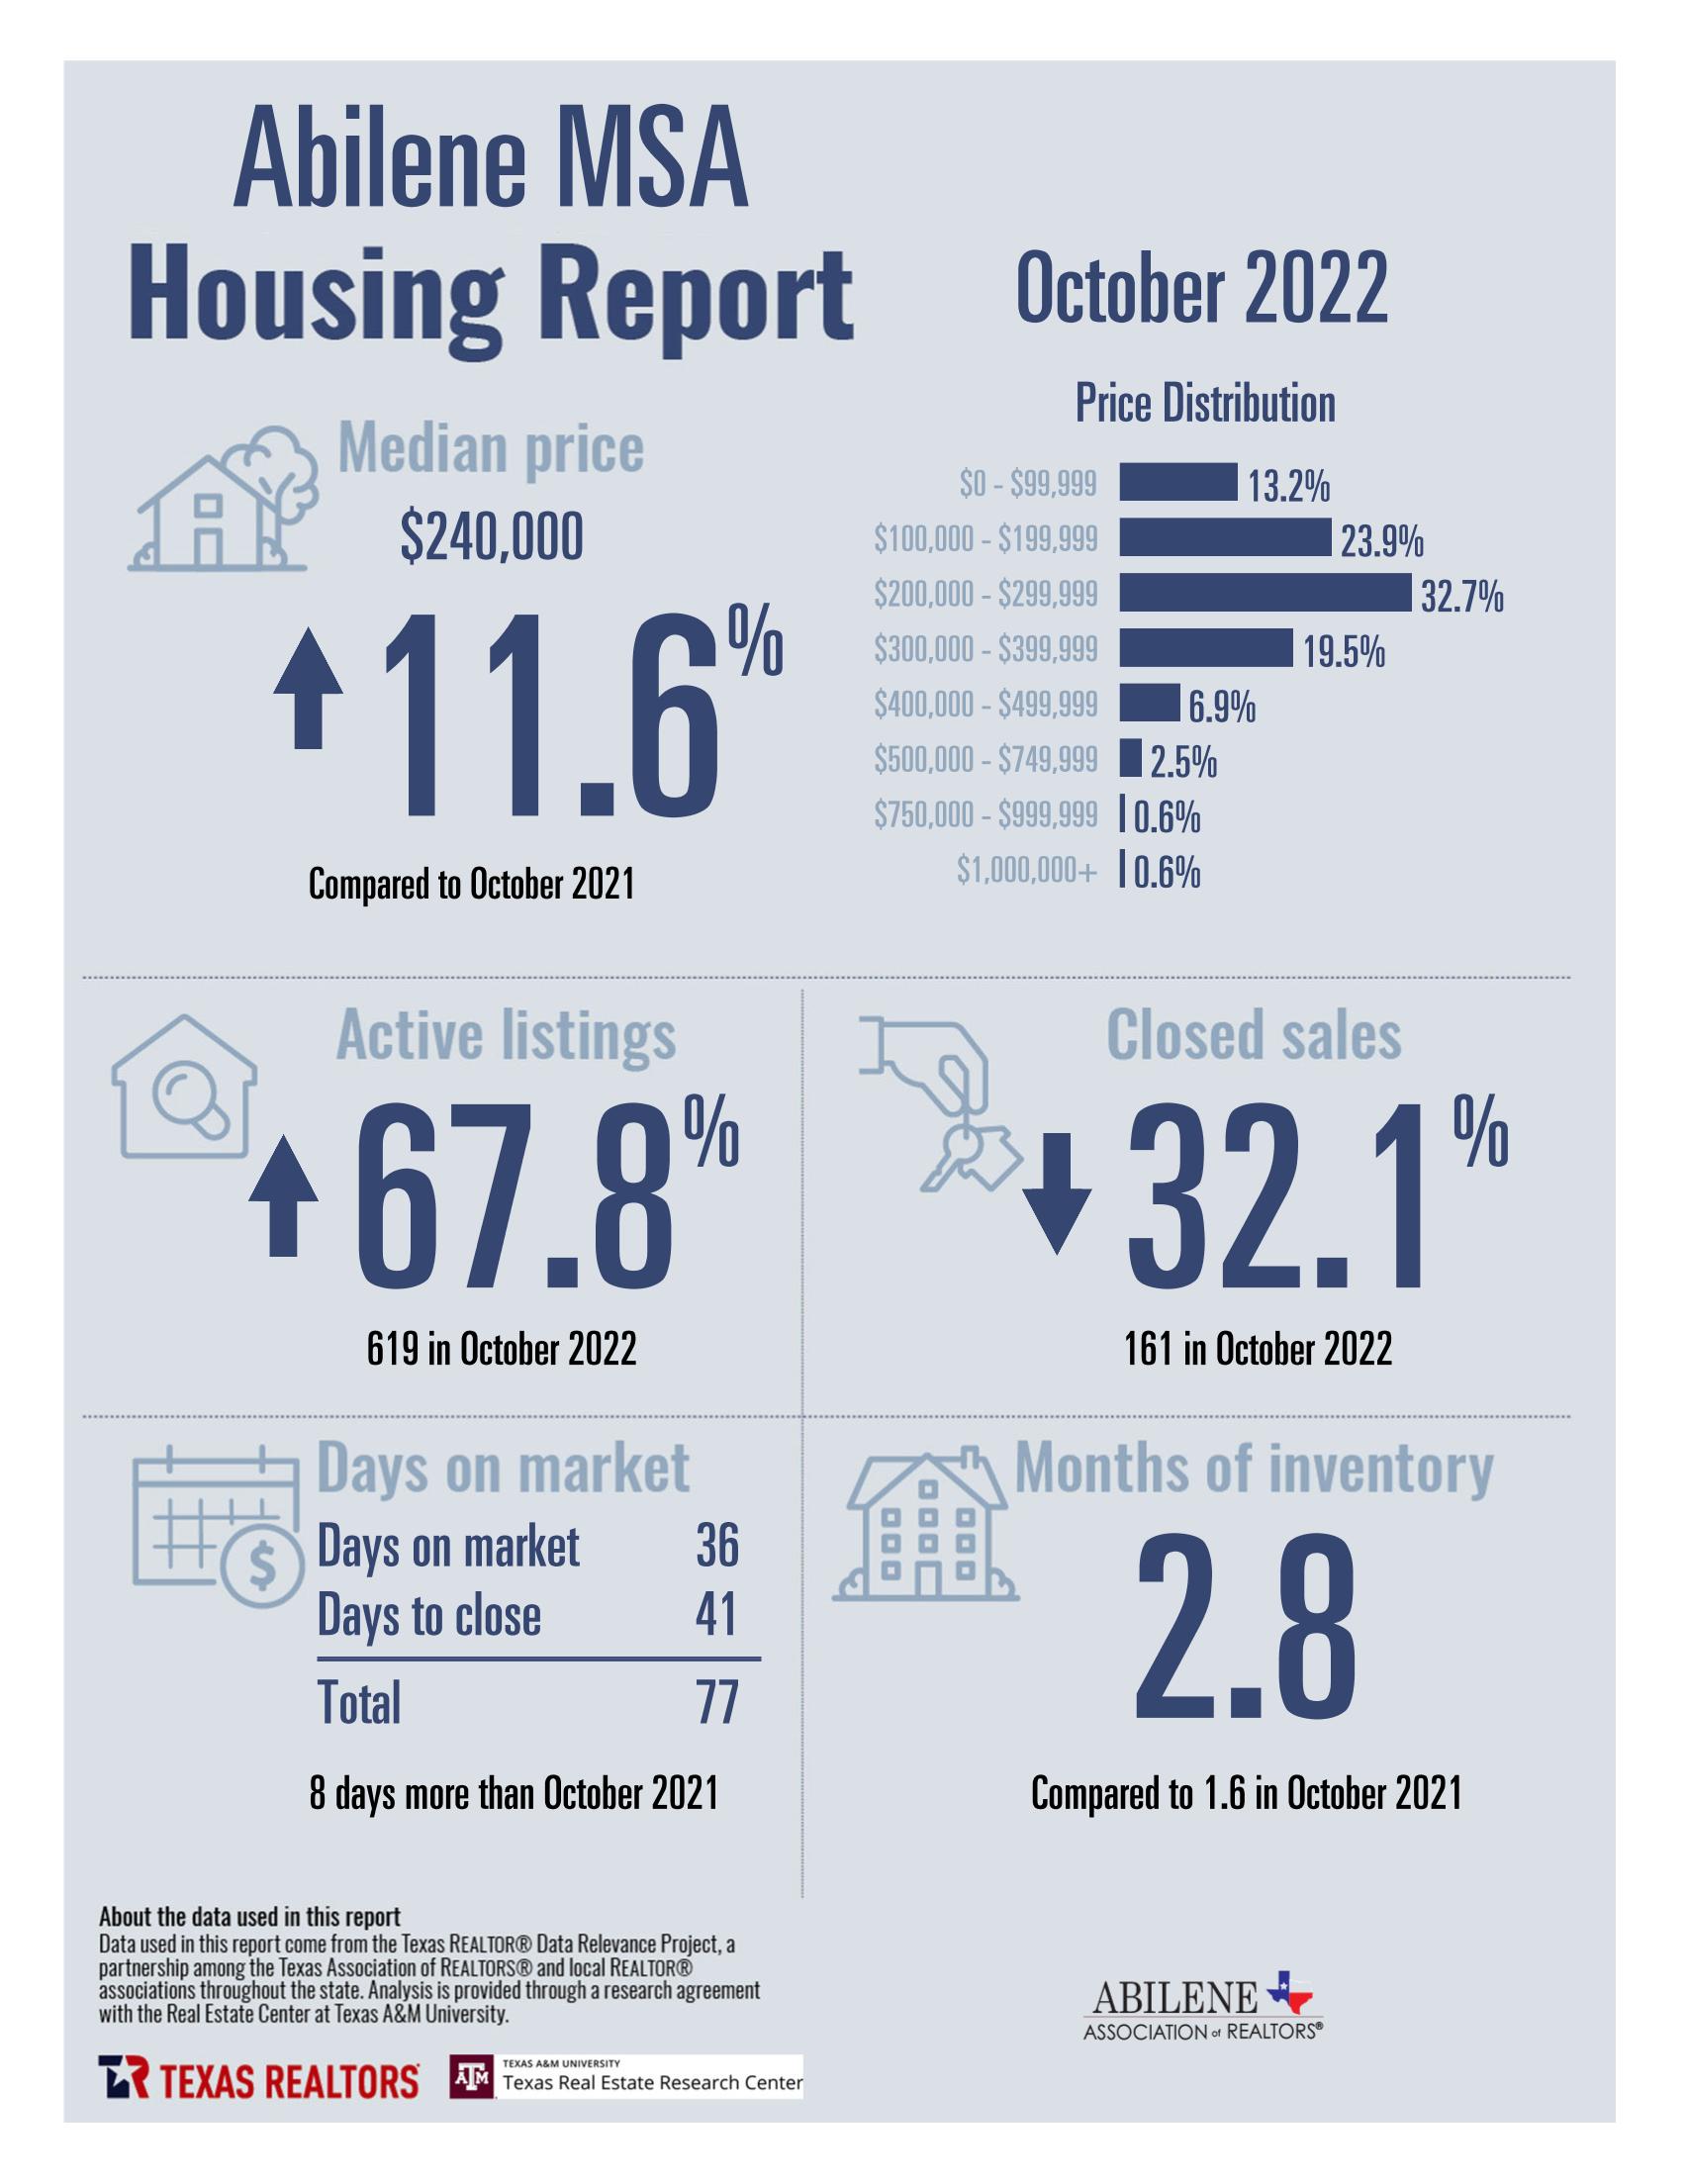 Abilene Housing Statistics. Median price, active listings, and closed sales for October 2022